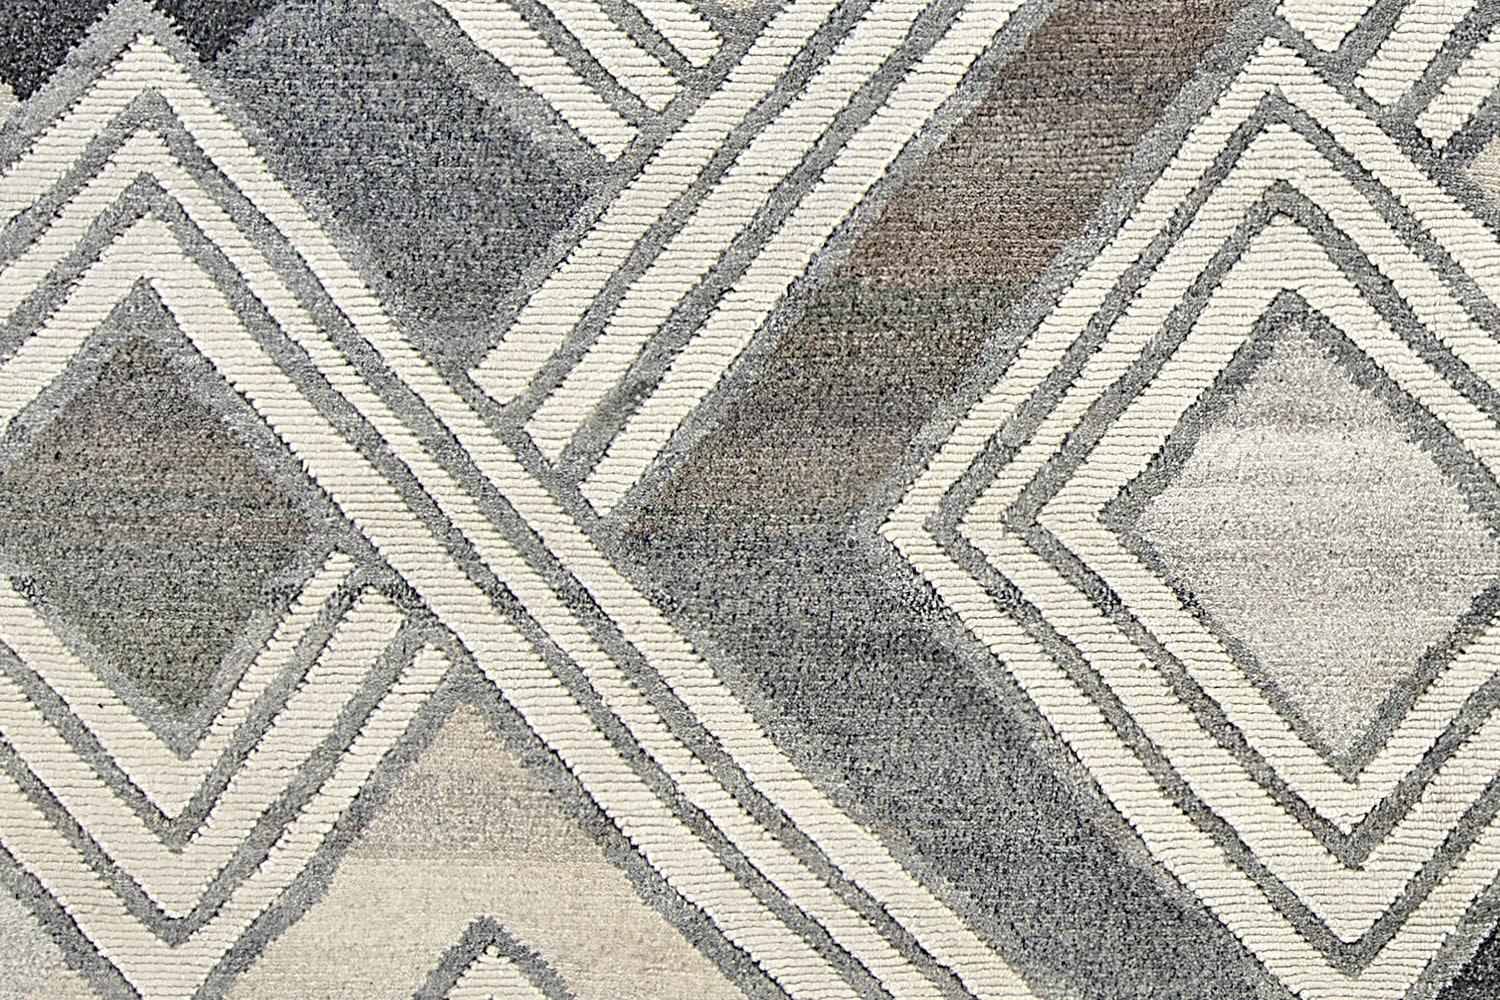 Sophisticated Wool and Viscose African Retro Rug Type / Country of Origin: India Circa Date: Modern / New - Size: 9 ft x 12 ft (2.74 m x 3.66 m). The dramatic grays, charcoal, and whites of this carpet have a dramatic impact and add a graphic